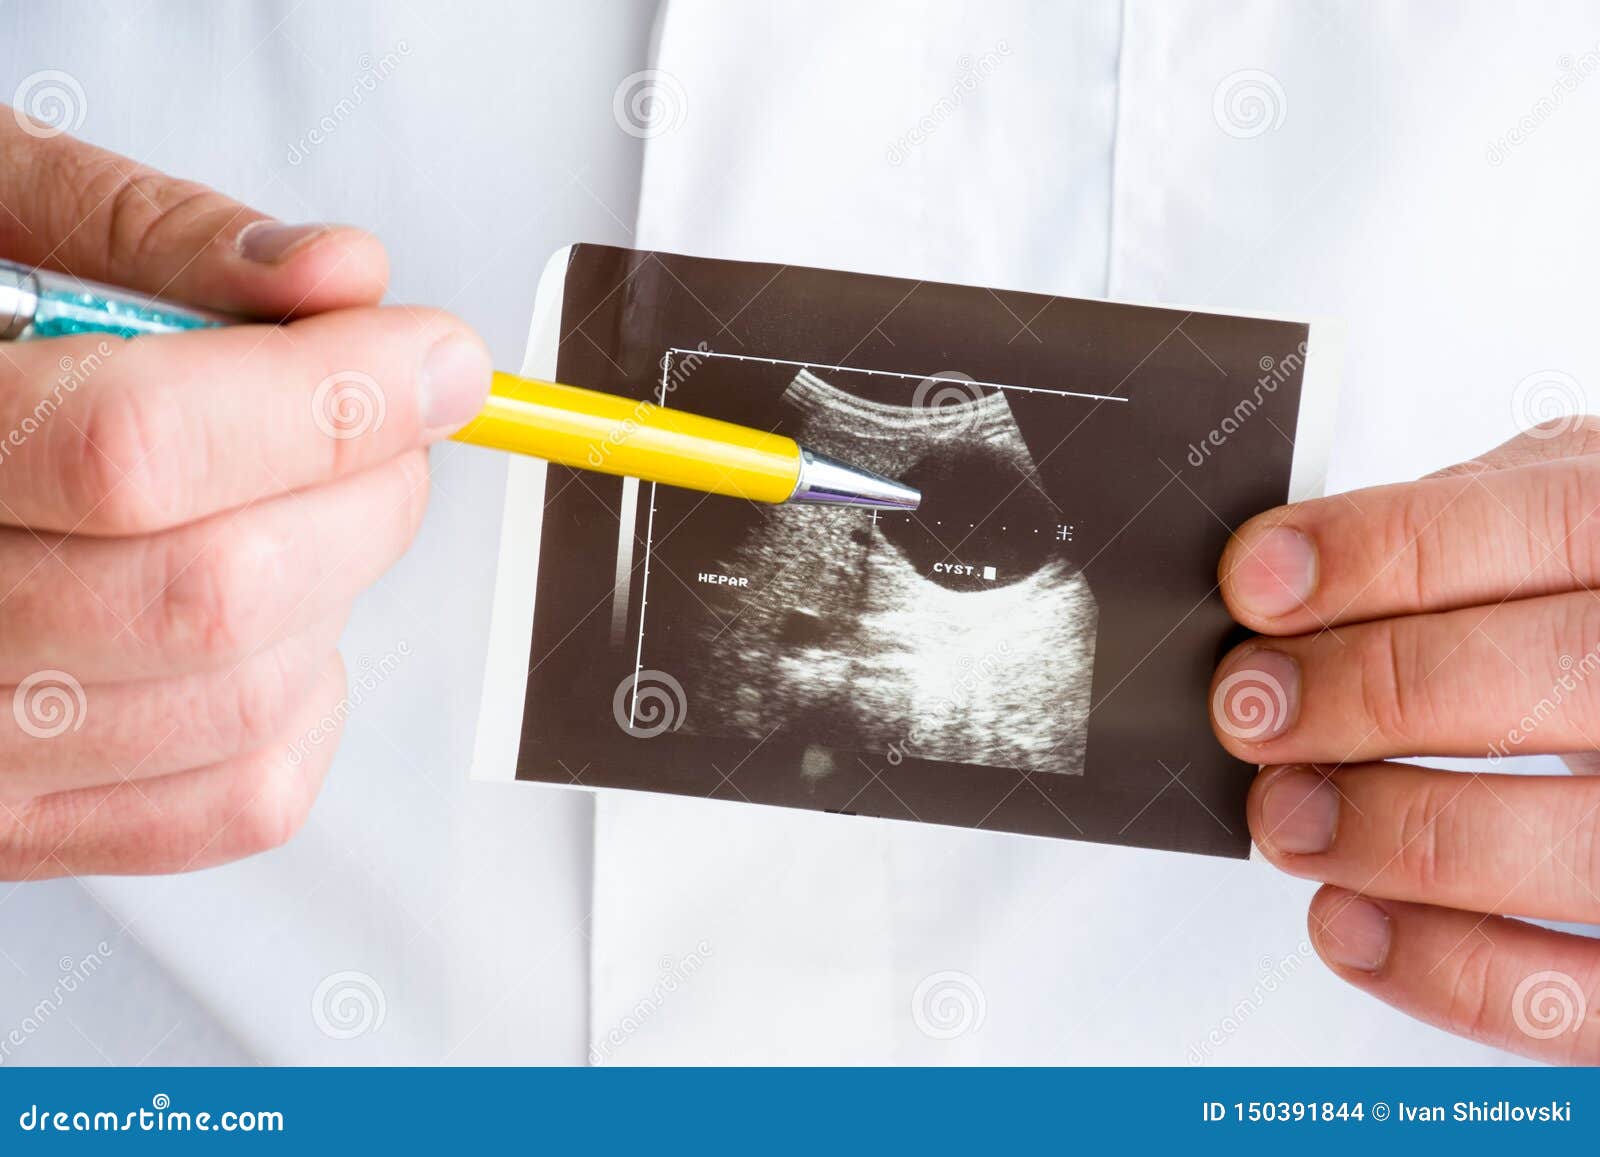 hepatic or liver cyst on ultrasound image concept photo. doctor indicating by pen on printed picture ultrasound pathology - hepati